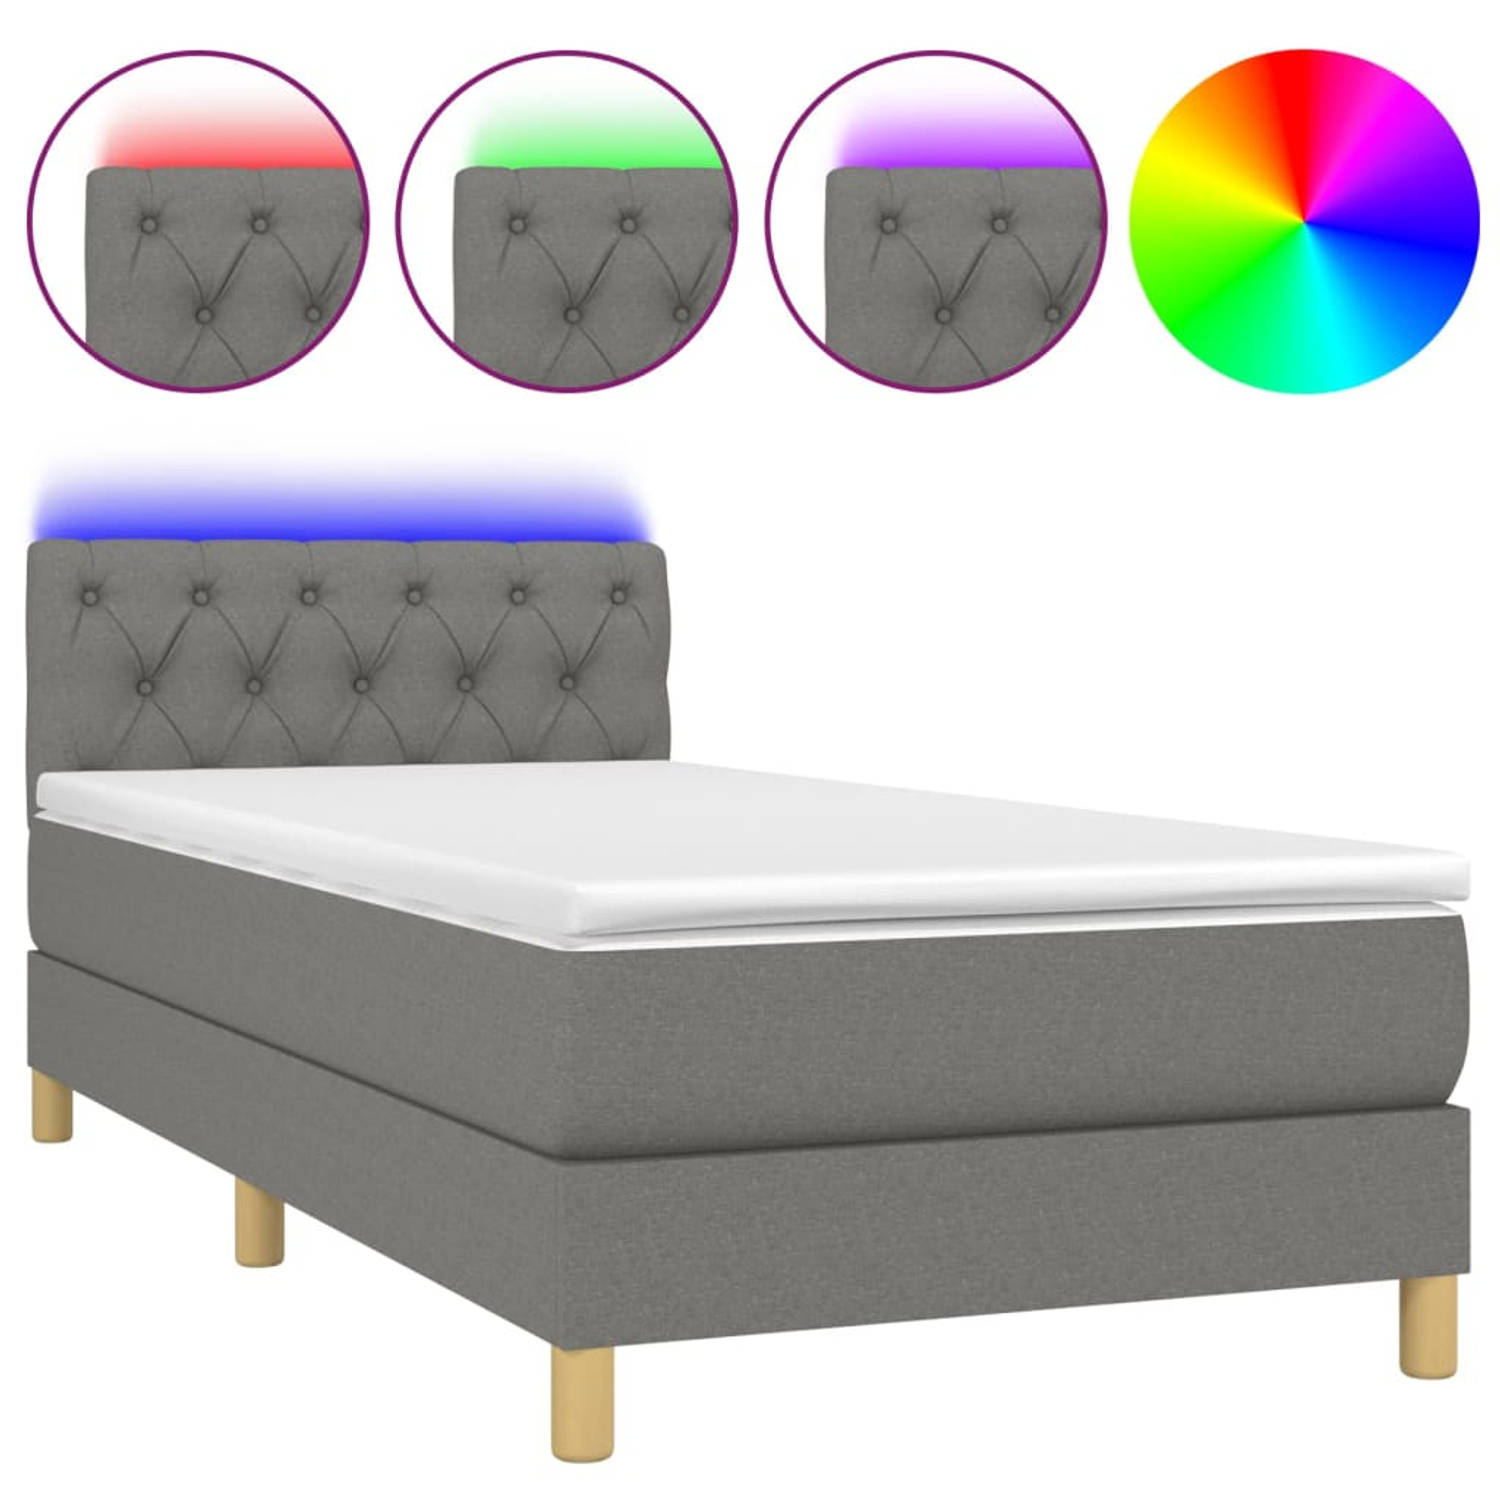 The Living Store Boxspring met matras en LED stof donkergrijs 80x200 cm - Boxspring - Boxsprings - Bed - Slaapmeubel - Boxspringbed - Boxspring Bed - Tweepersoonsbed - Bed Met Matr